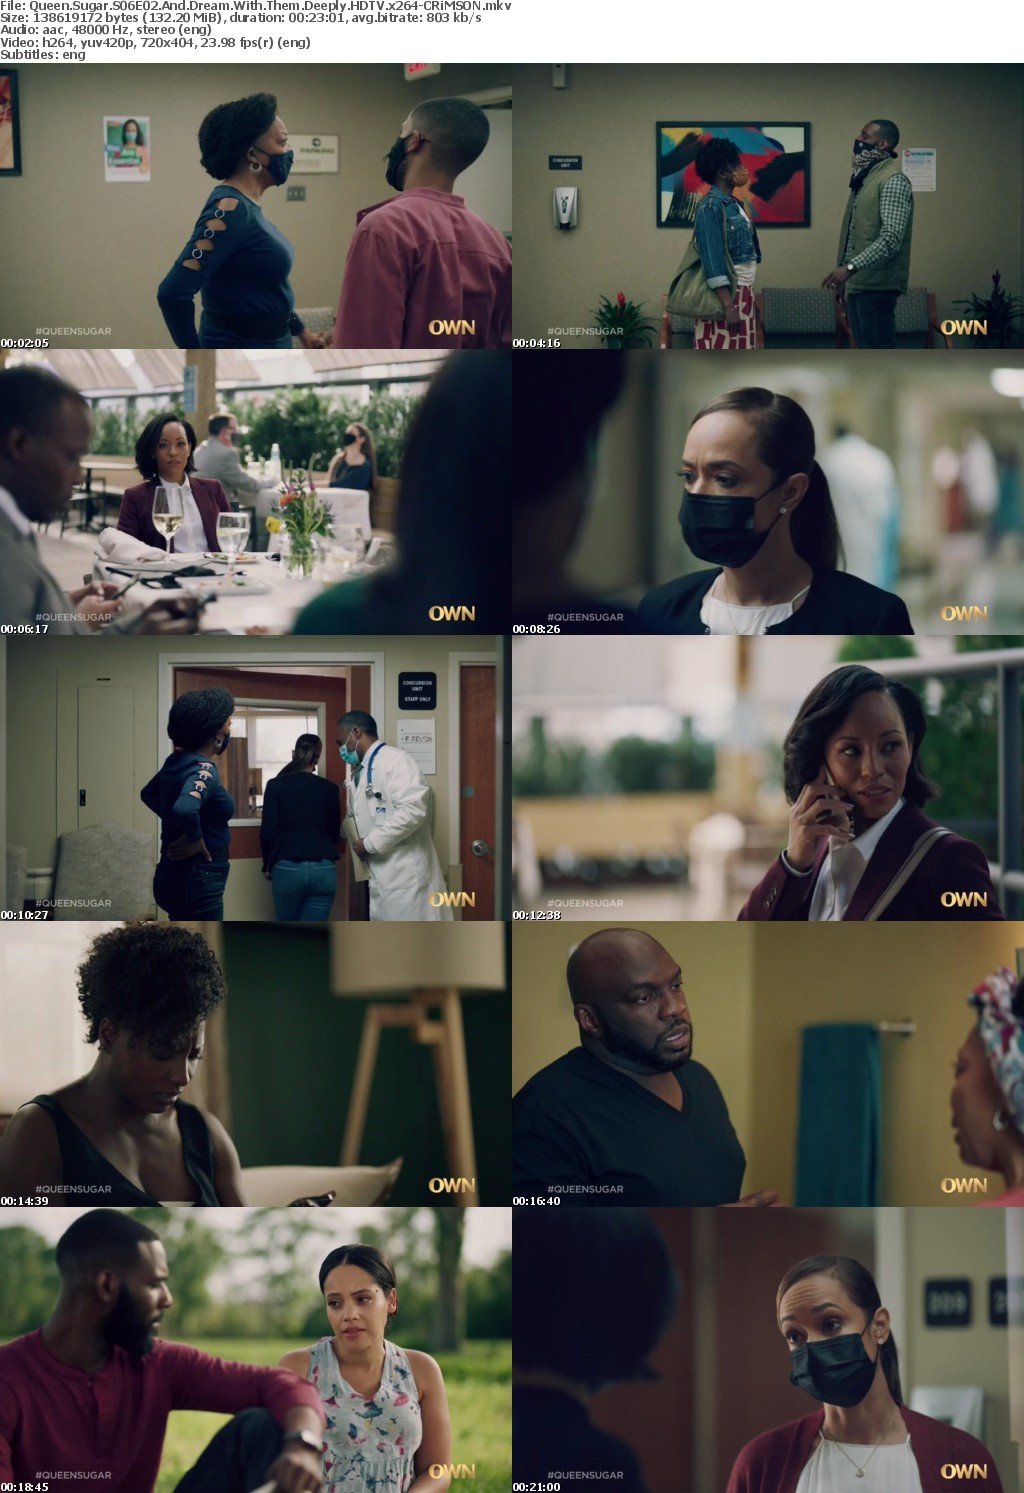 Queen Sugar S06E02 And Dream With Them Deeply HDTV x264-CRiMSON